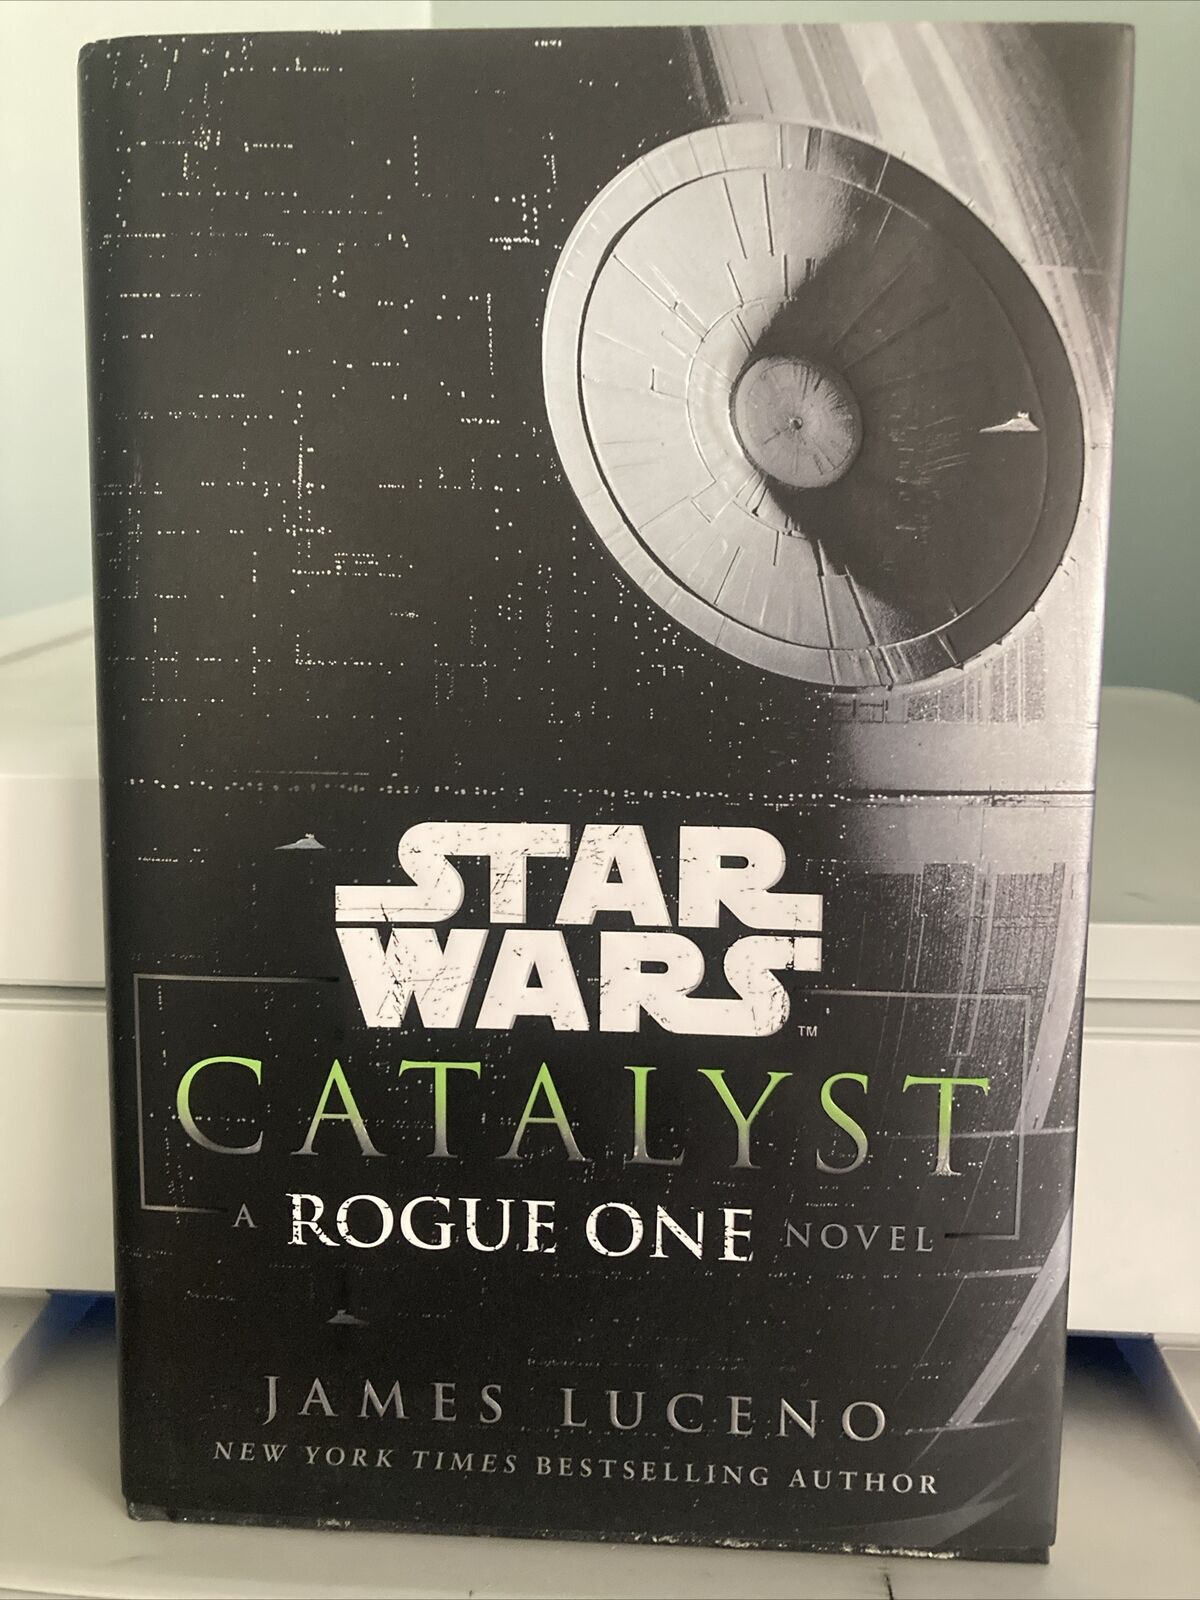 Star Wars Catalyst: A Rogue One Novel by James Luceno 2016 First Edition